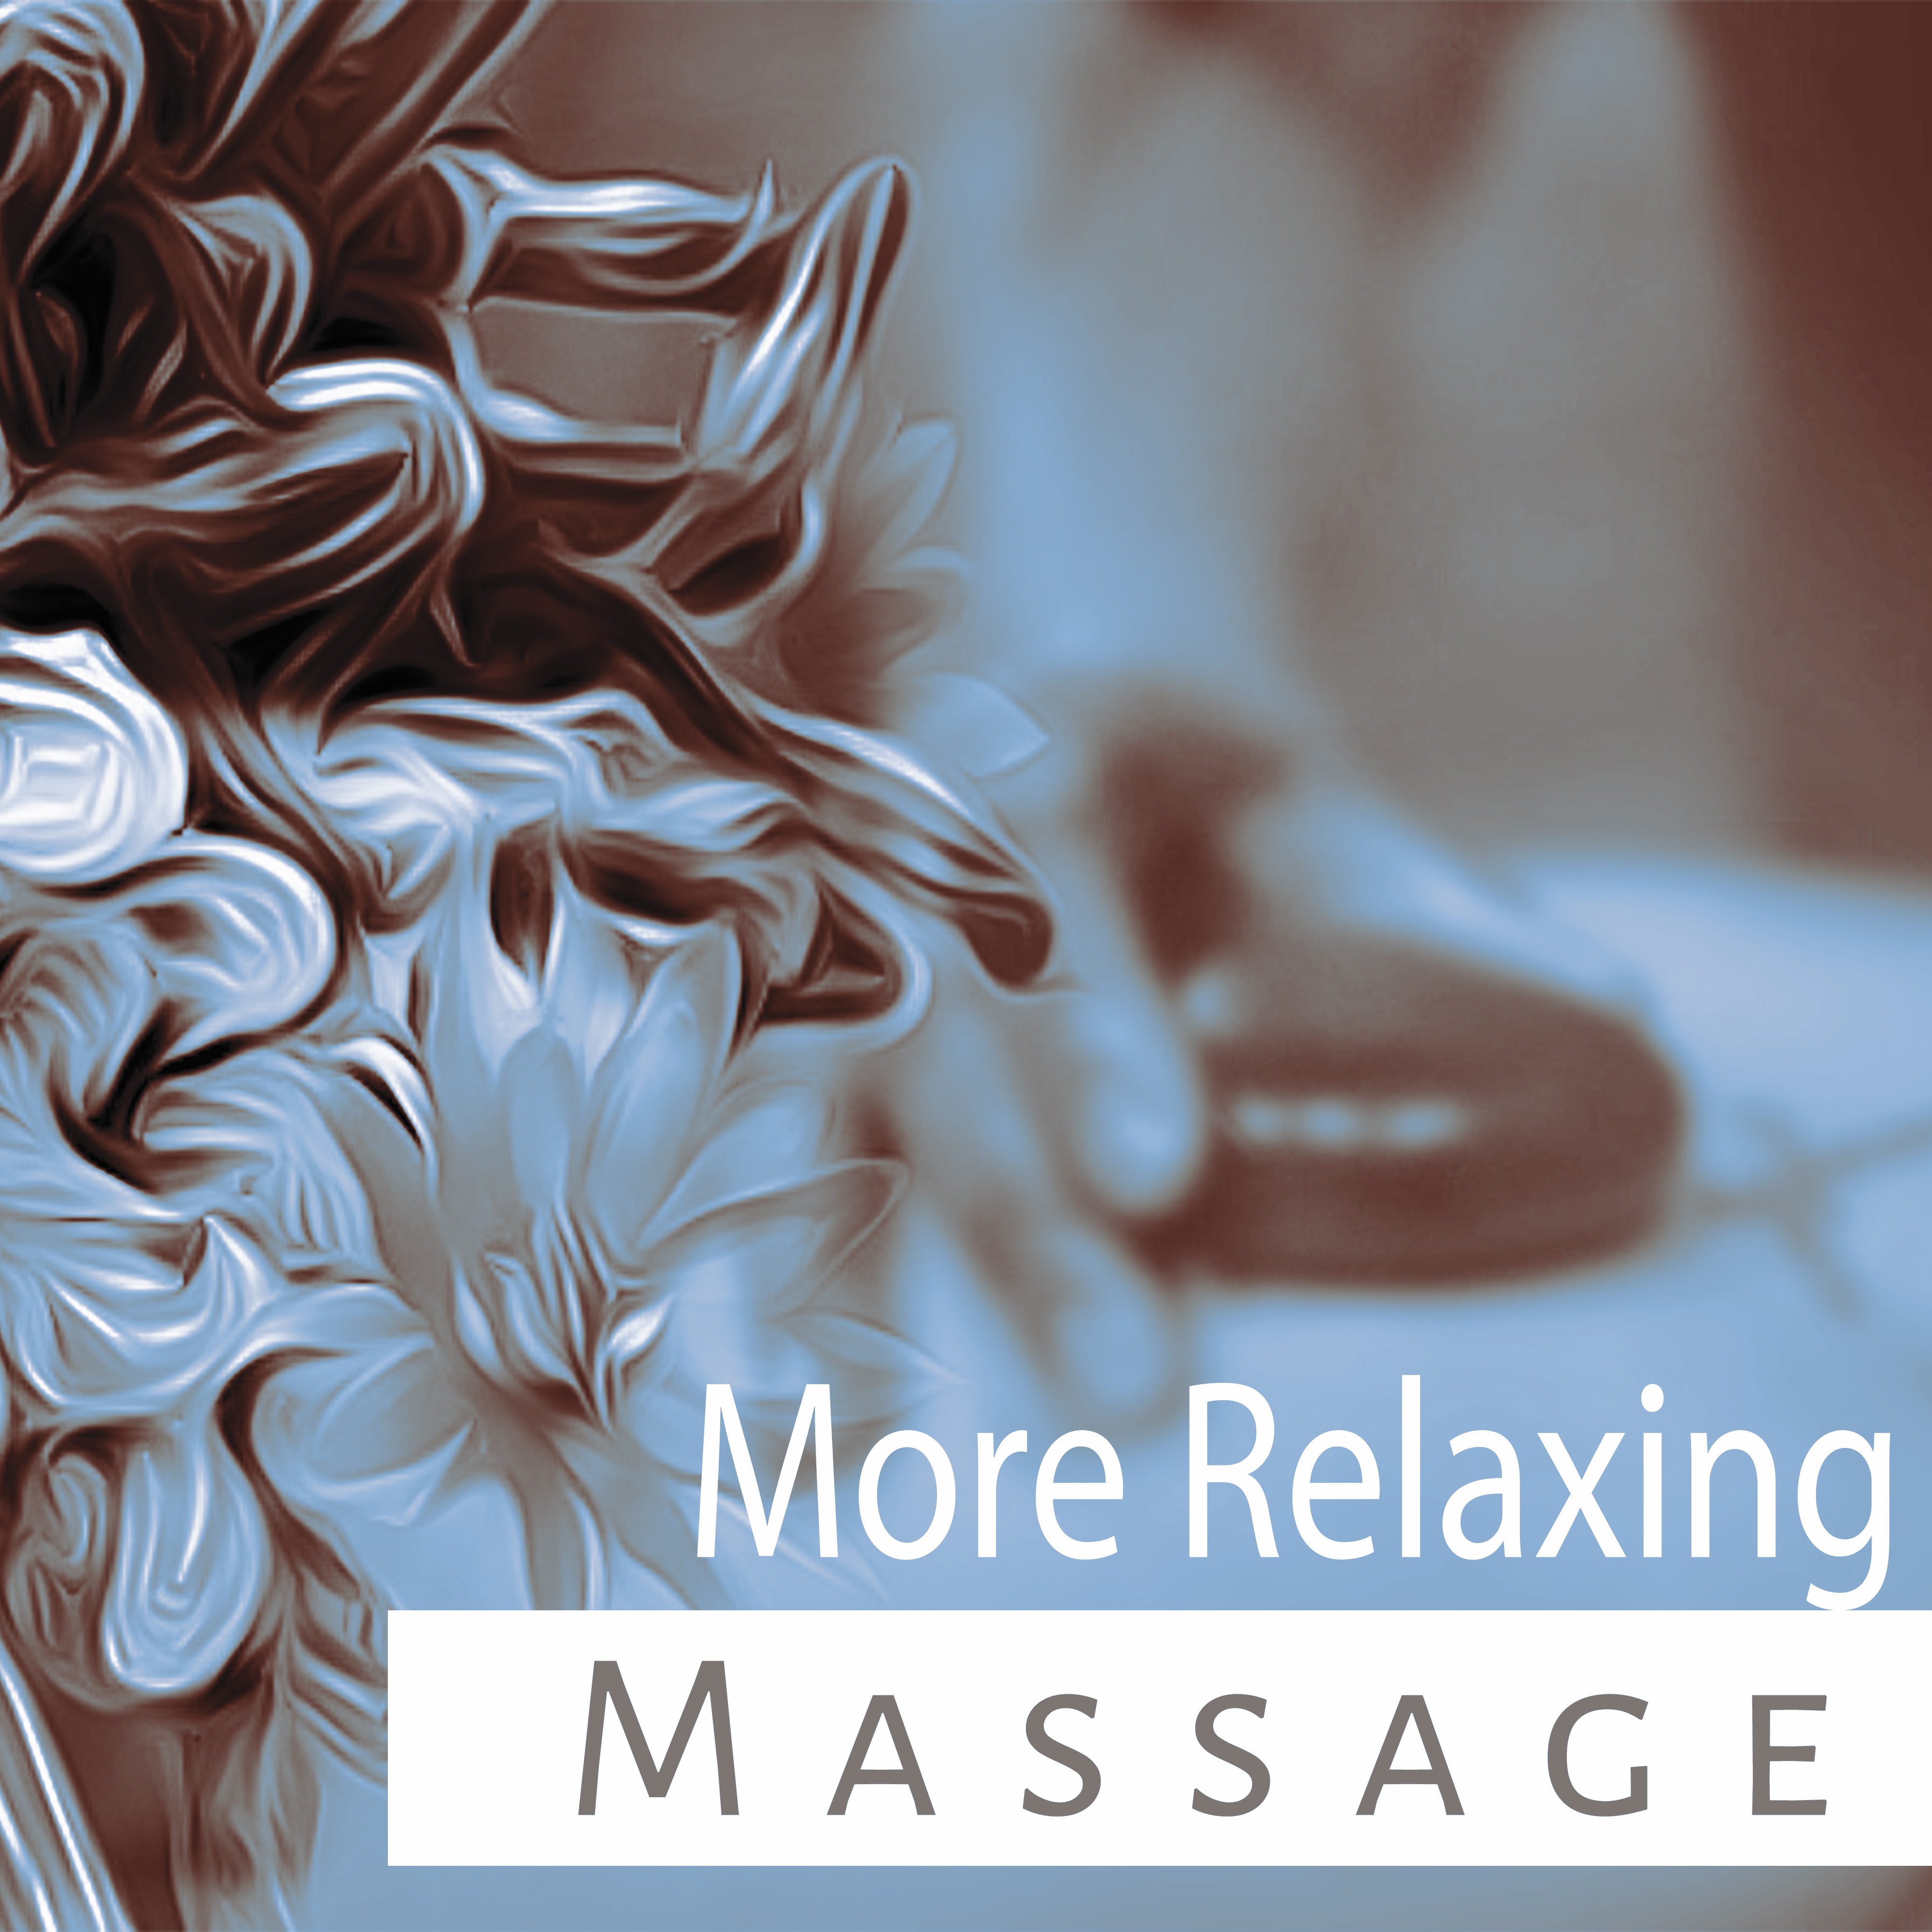 More Relaxing Massage  Calming Sounds of Nature, Instrumental New Age, Relaxing Music for Spa, Massage Treatments